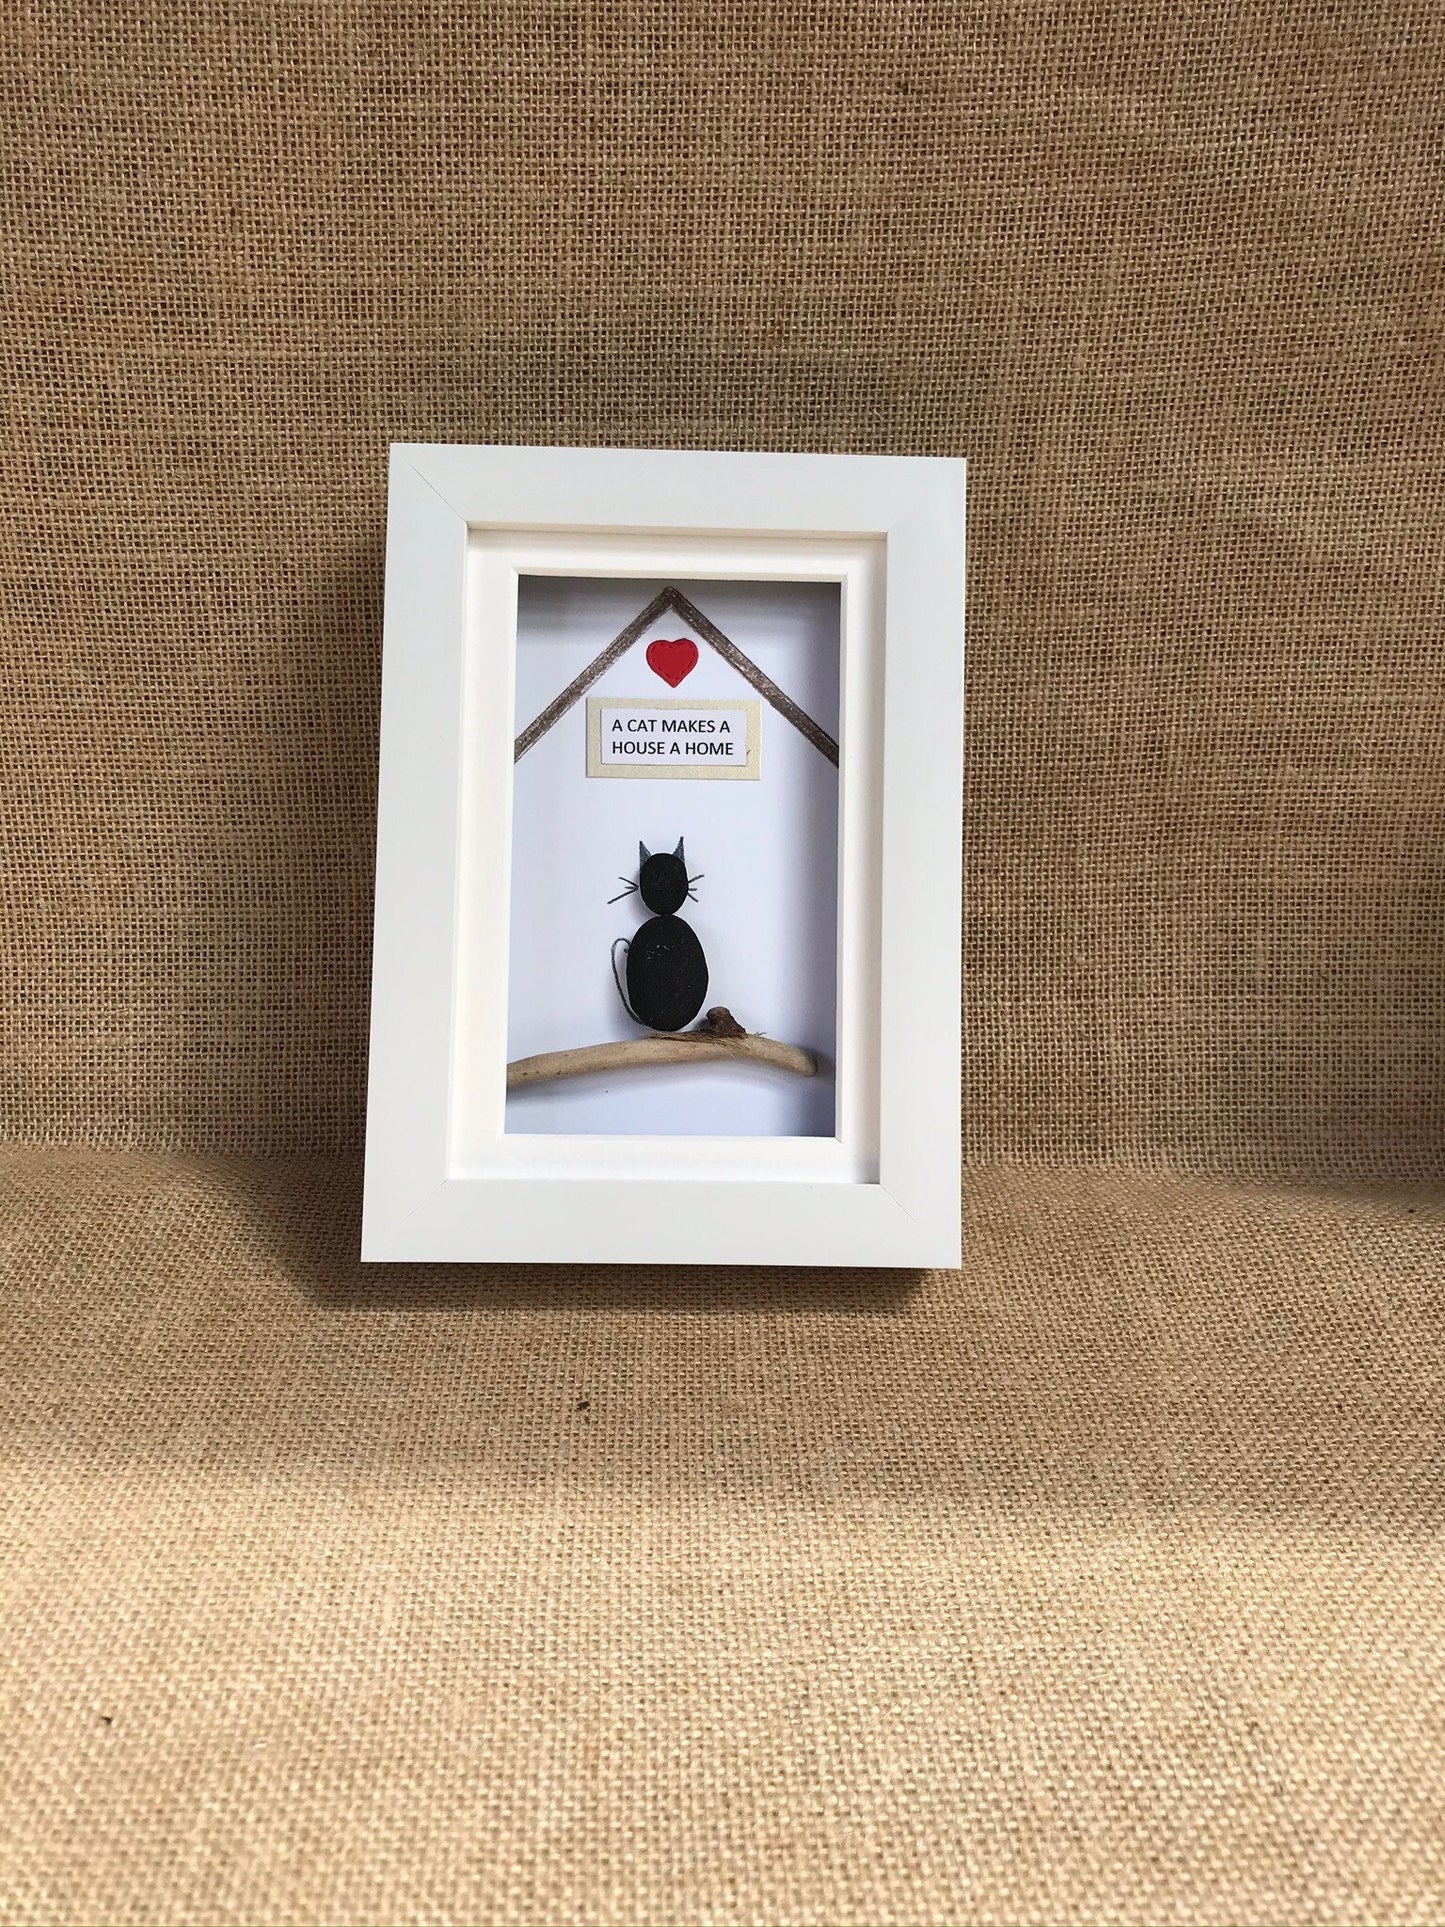 Handmade Cat Pebble Art Picture - Makes a House a Home